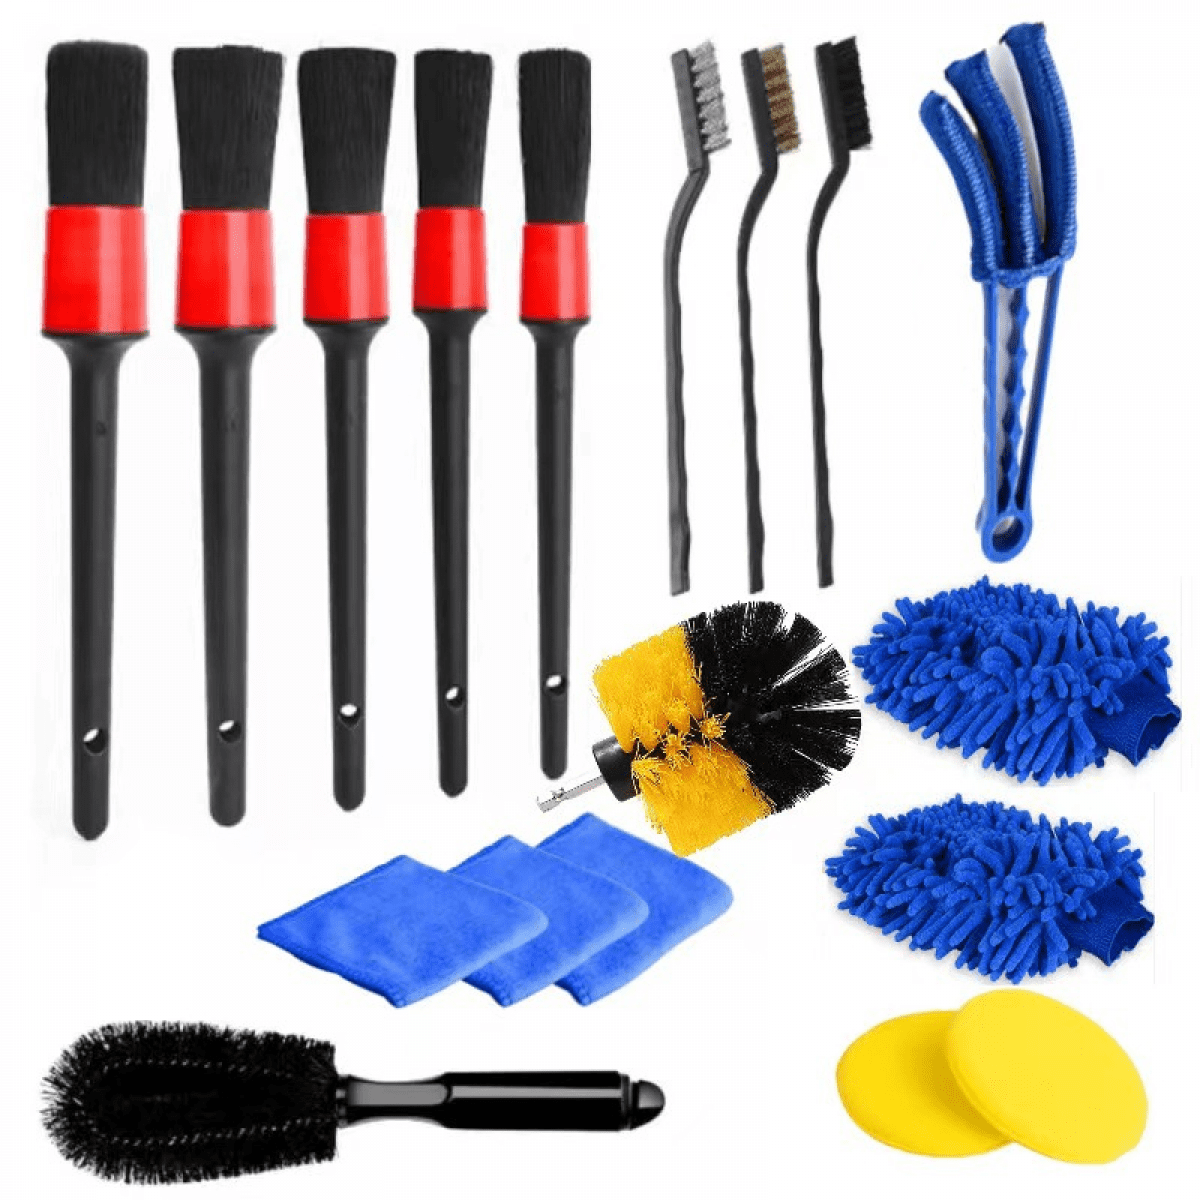 FGY 10 PCS Car Detailing Brush Kit for Auto Interior and Exterior Includes  Detailing Brushes, Wire Brush & Air Vent Brush, Cleaning Towel 